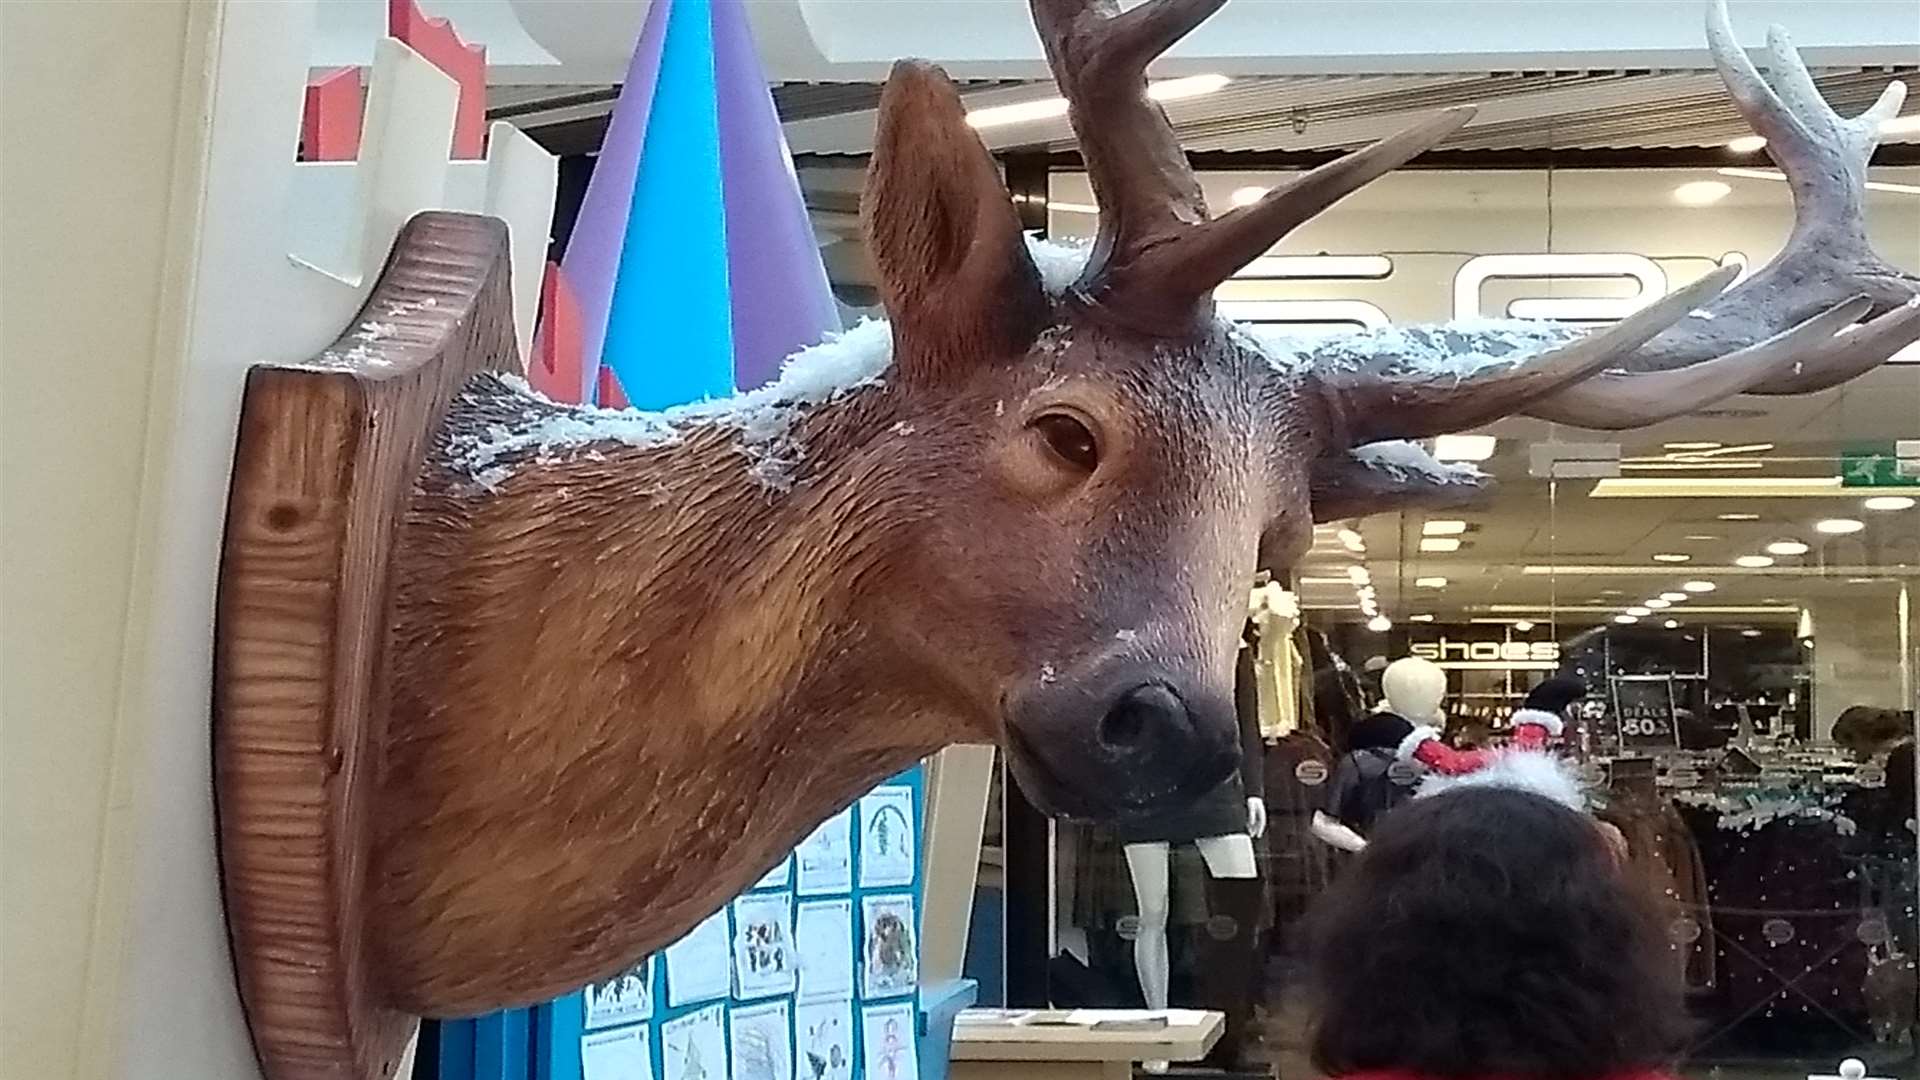 The mounted reindeer head in question